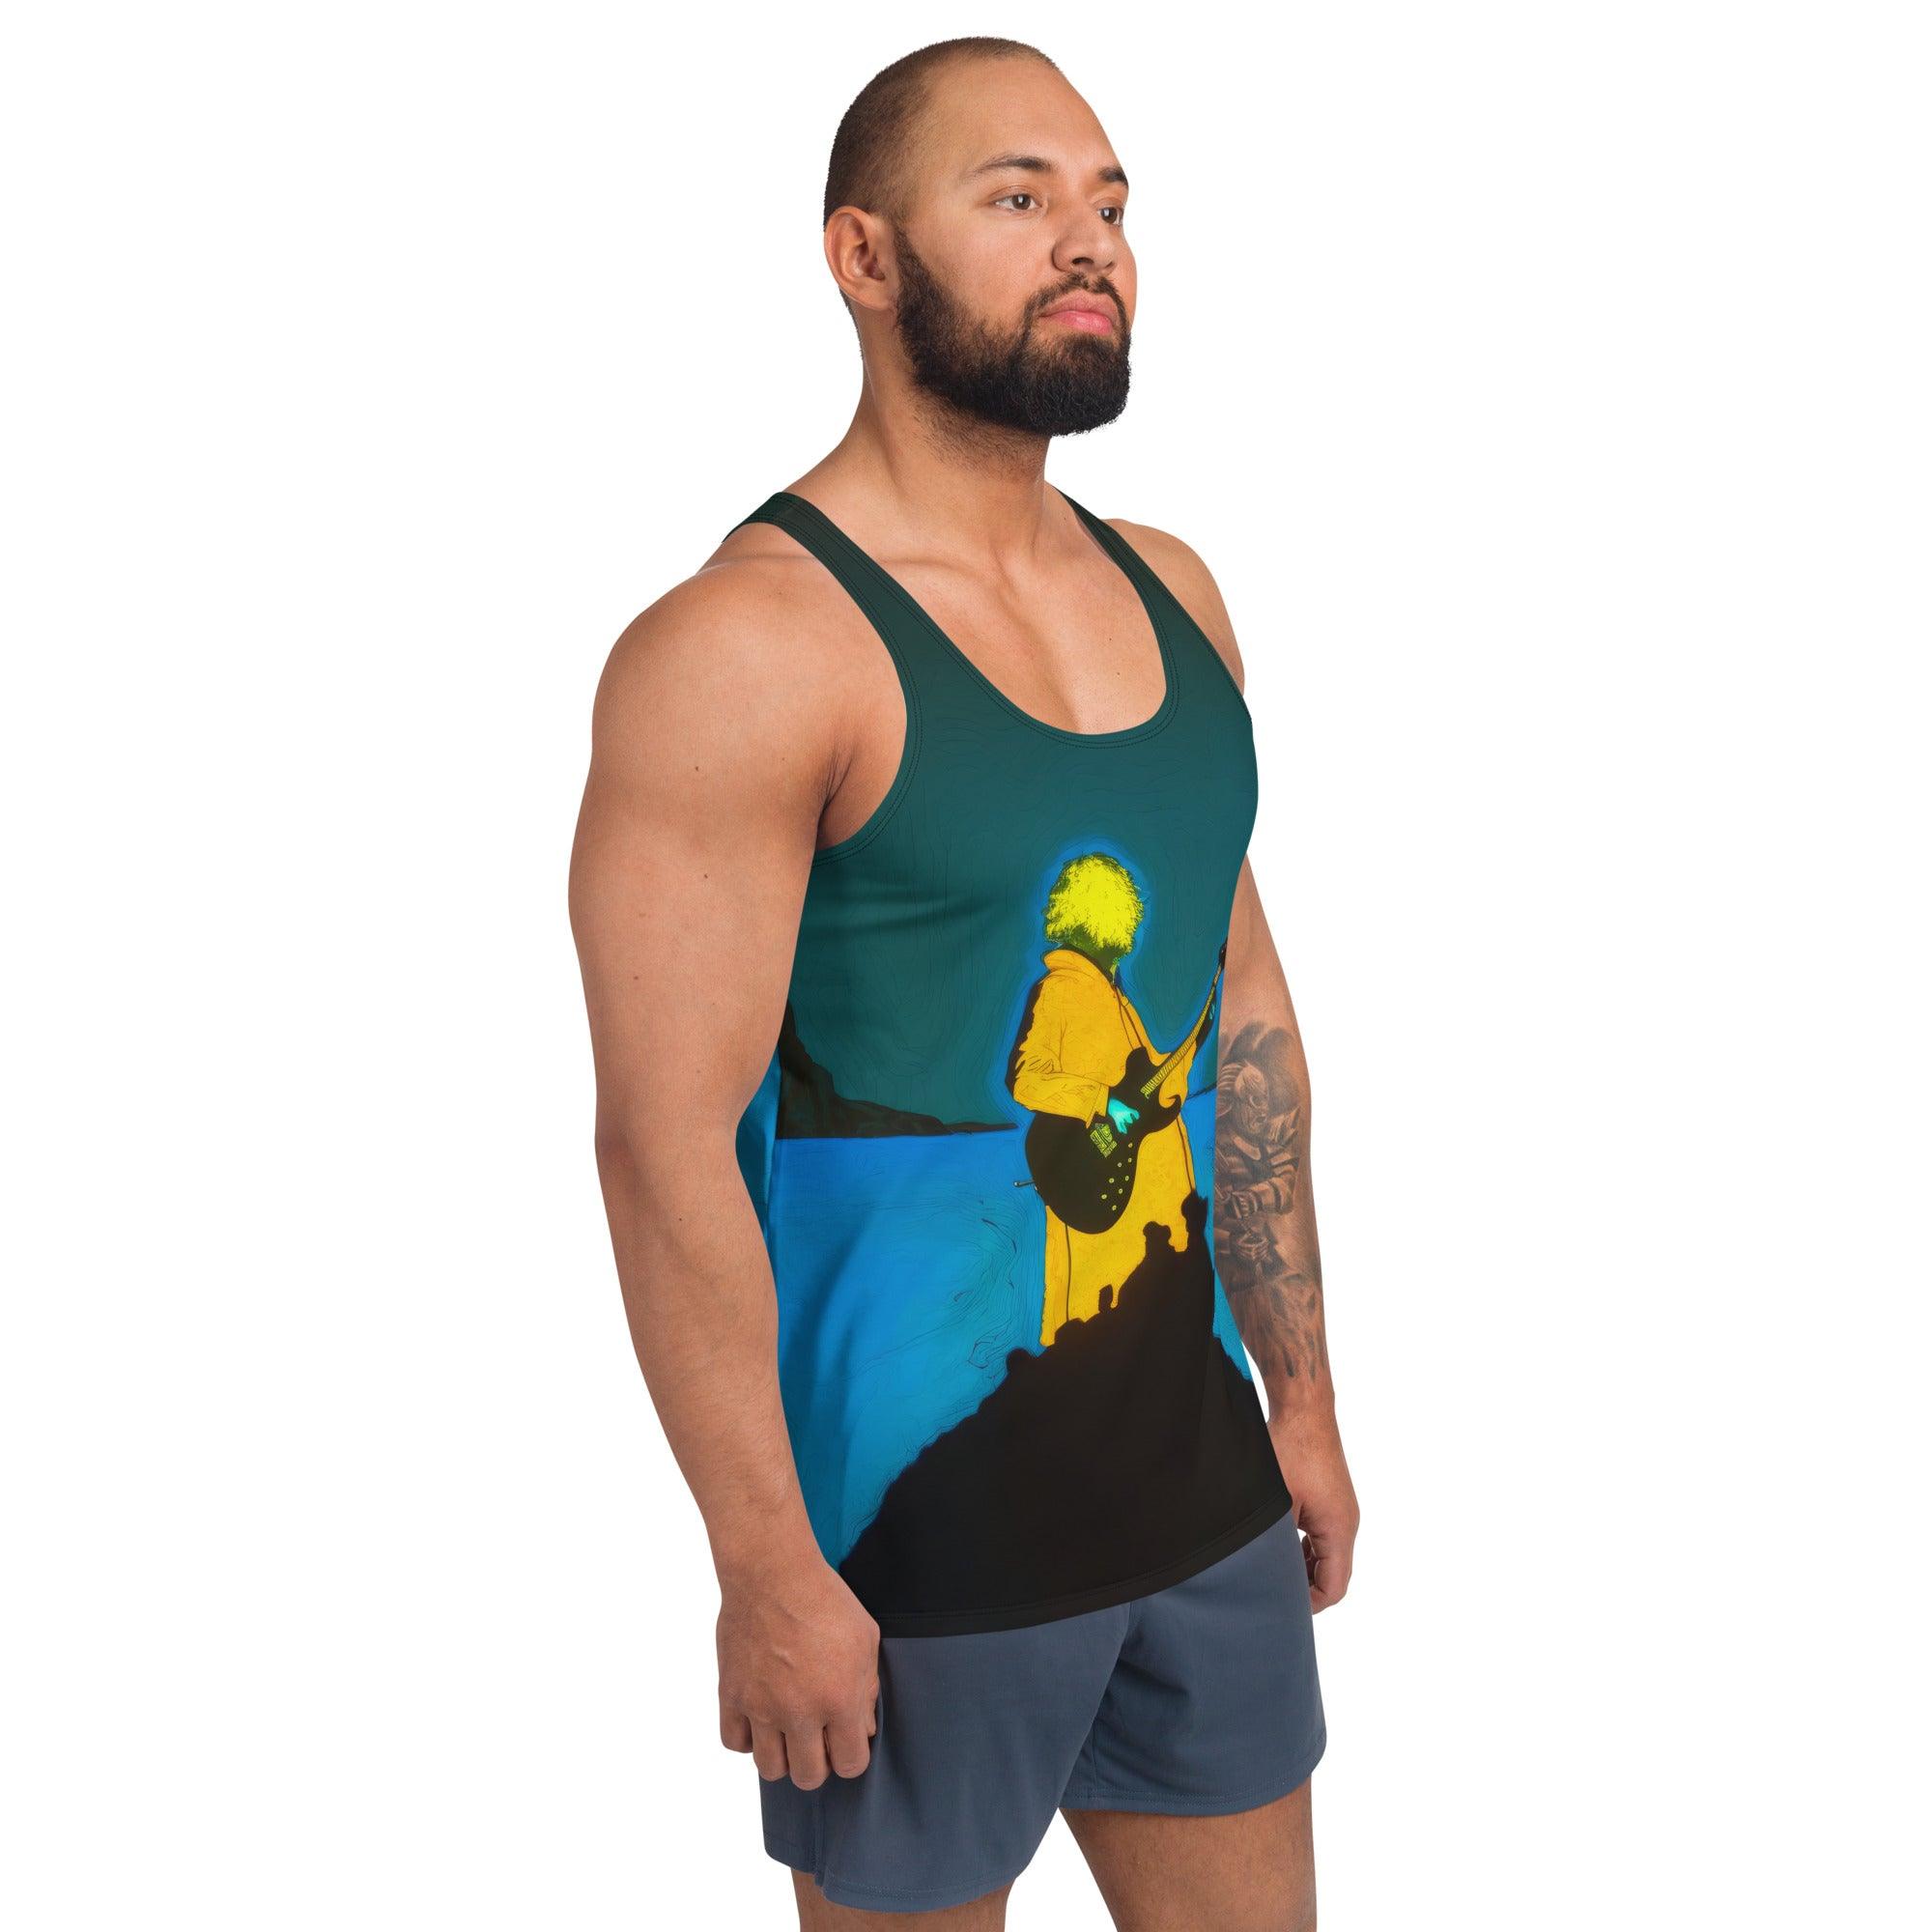 NS 858 Men's Tank Top front and back view.